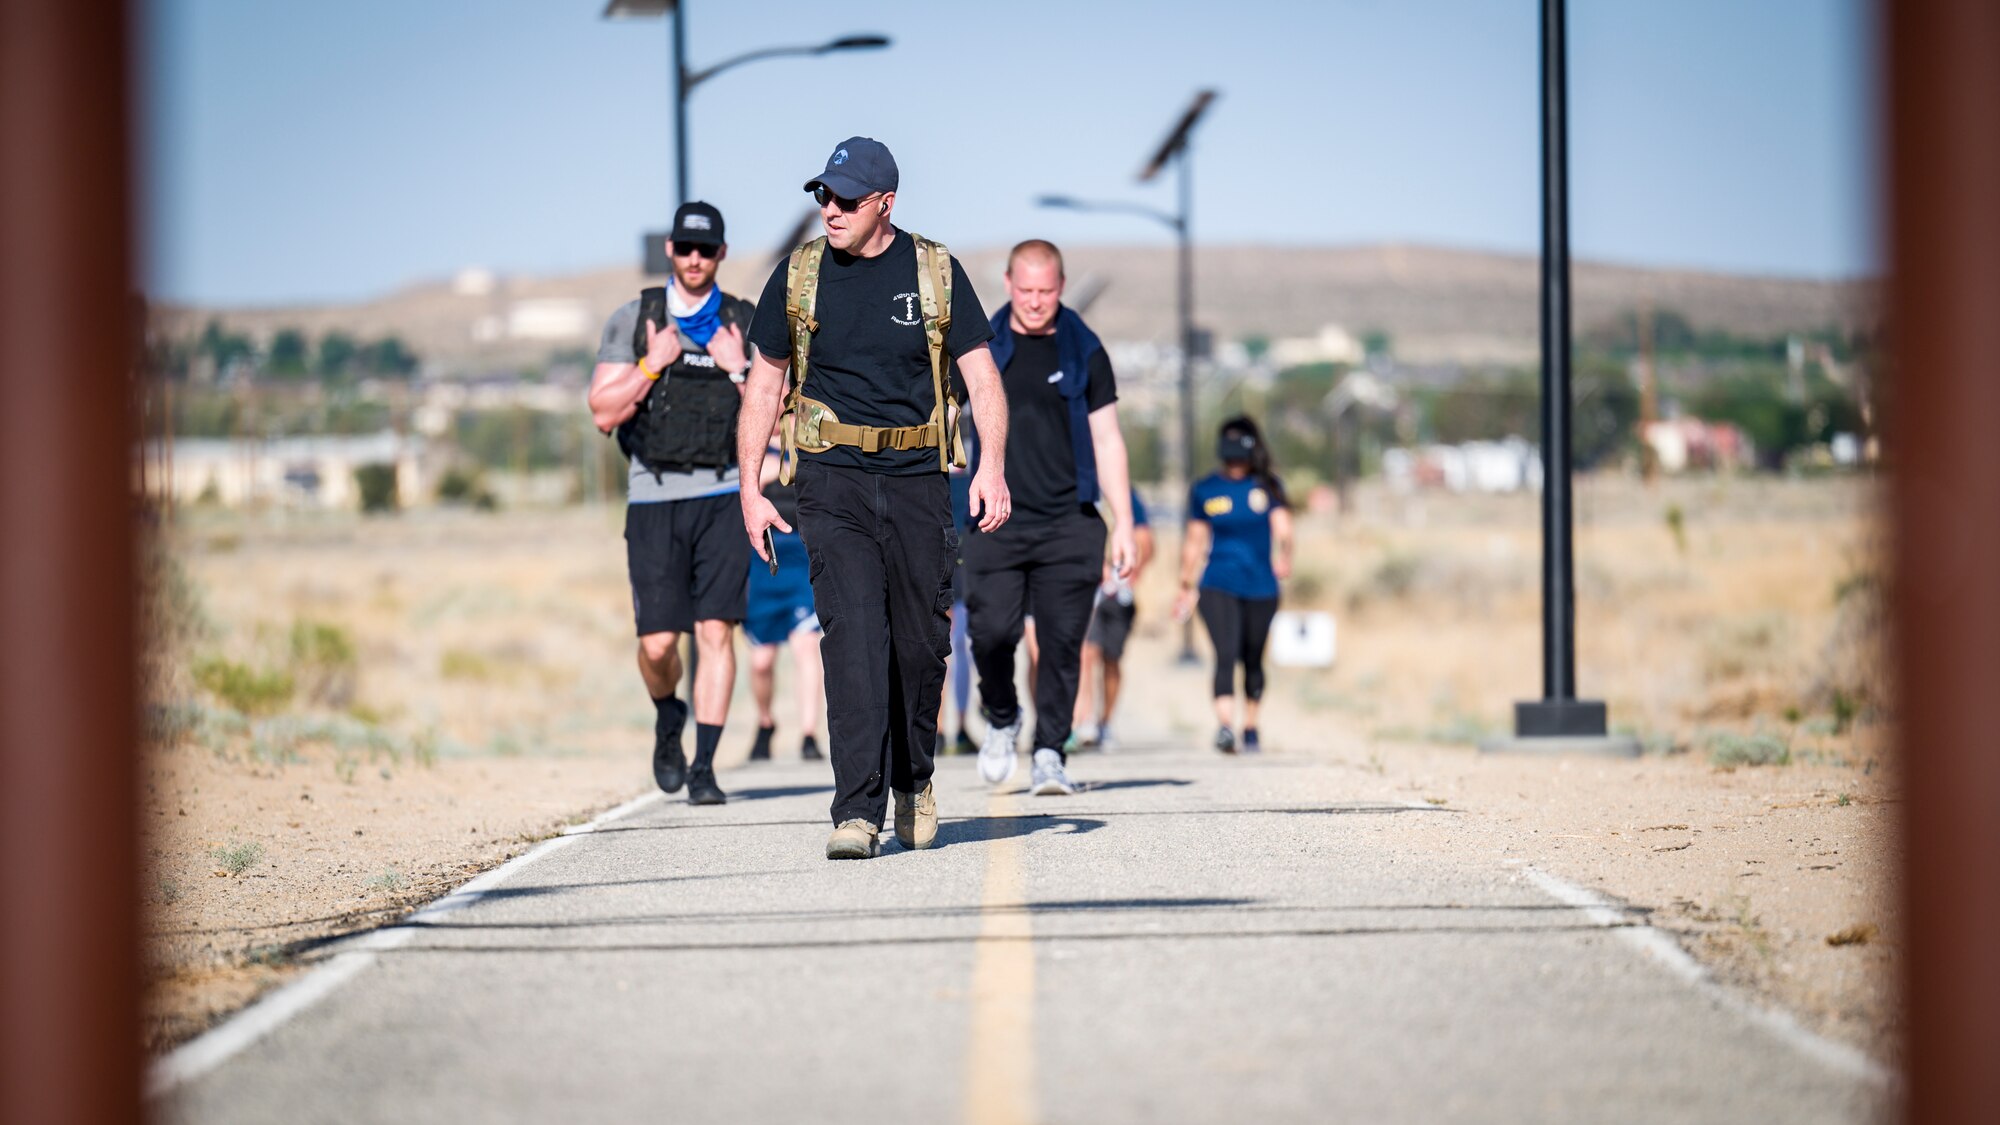 Lt. Col. Joseph Bincarousky, 412th Security Forces Squadron commander, completes the Annual Police Week Run/Ruck/Walk Event at Edwards Air Force Base, California, May 10. (Air Force photo by Giancarlo Casem)